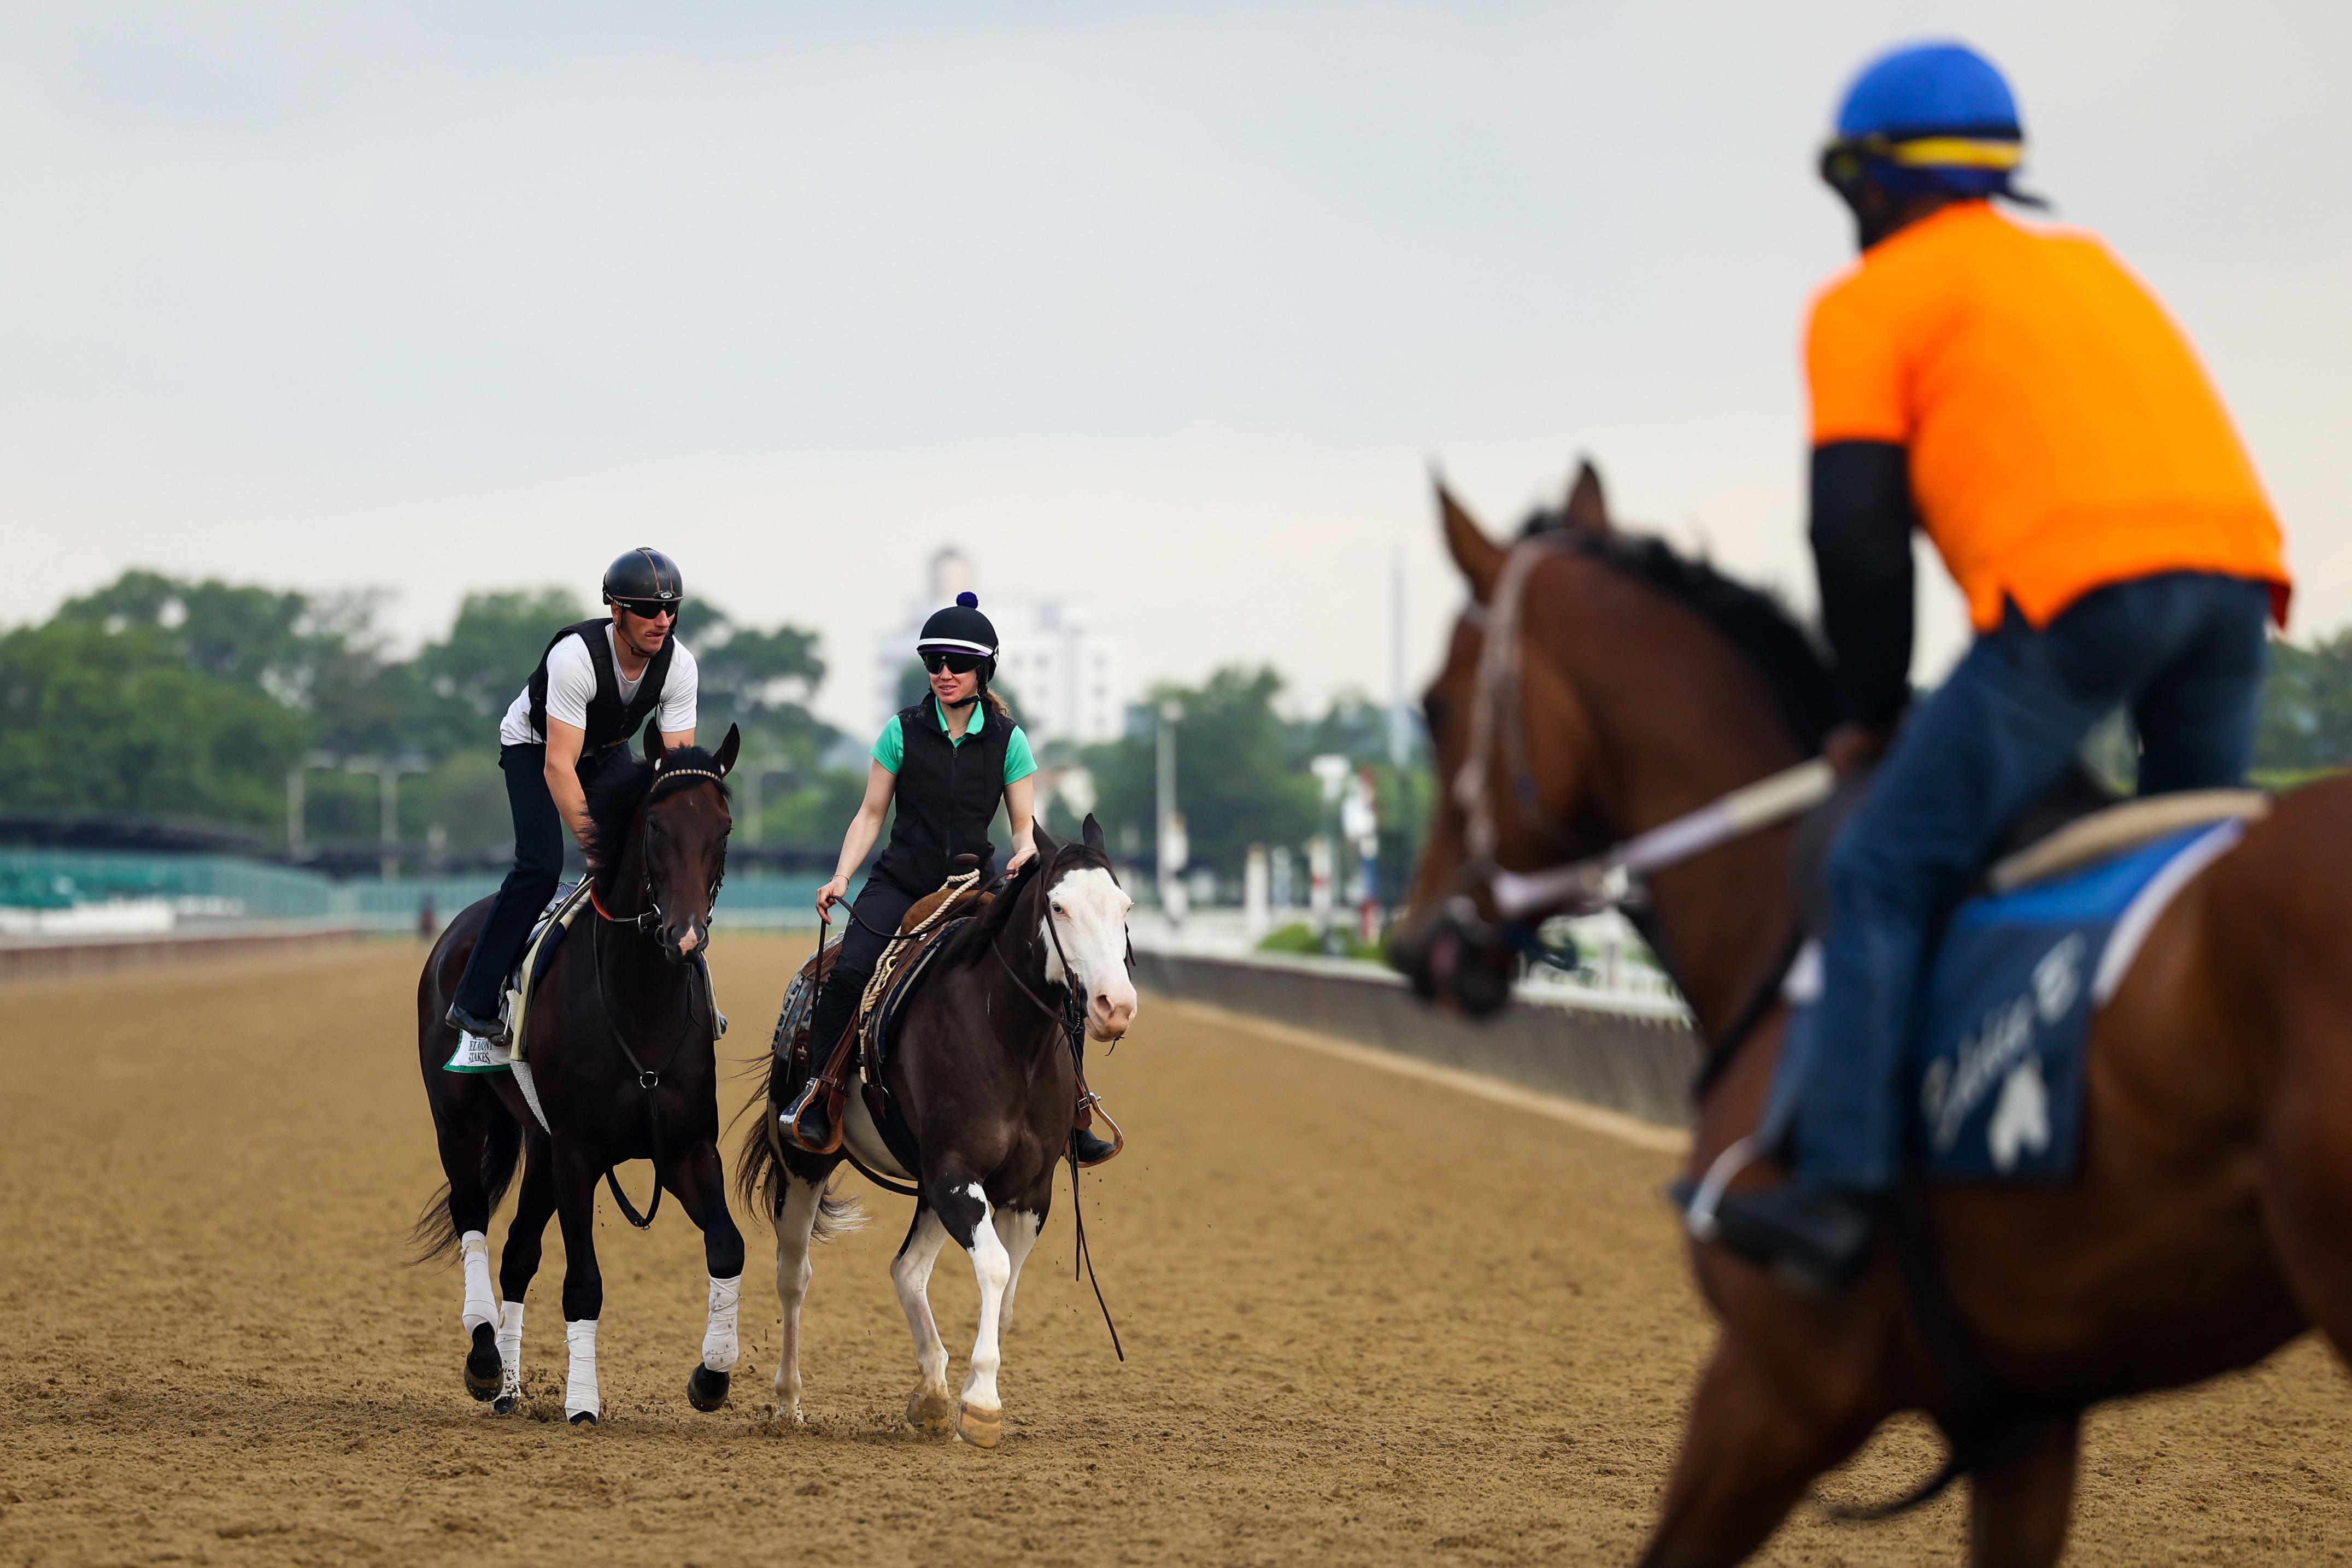 2022 Belmont Stakes Contenders and Odds